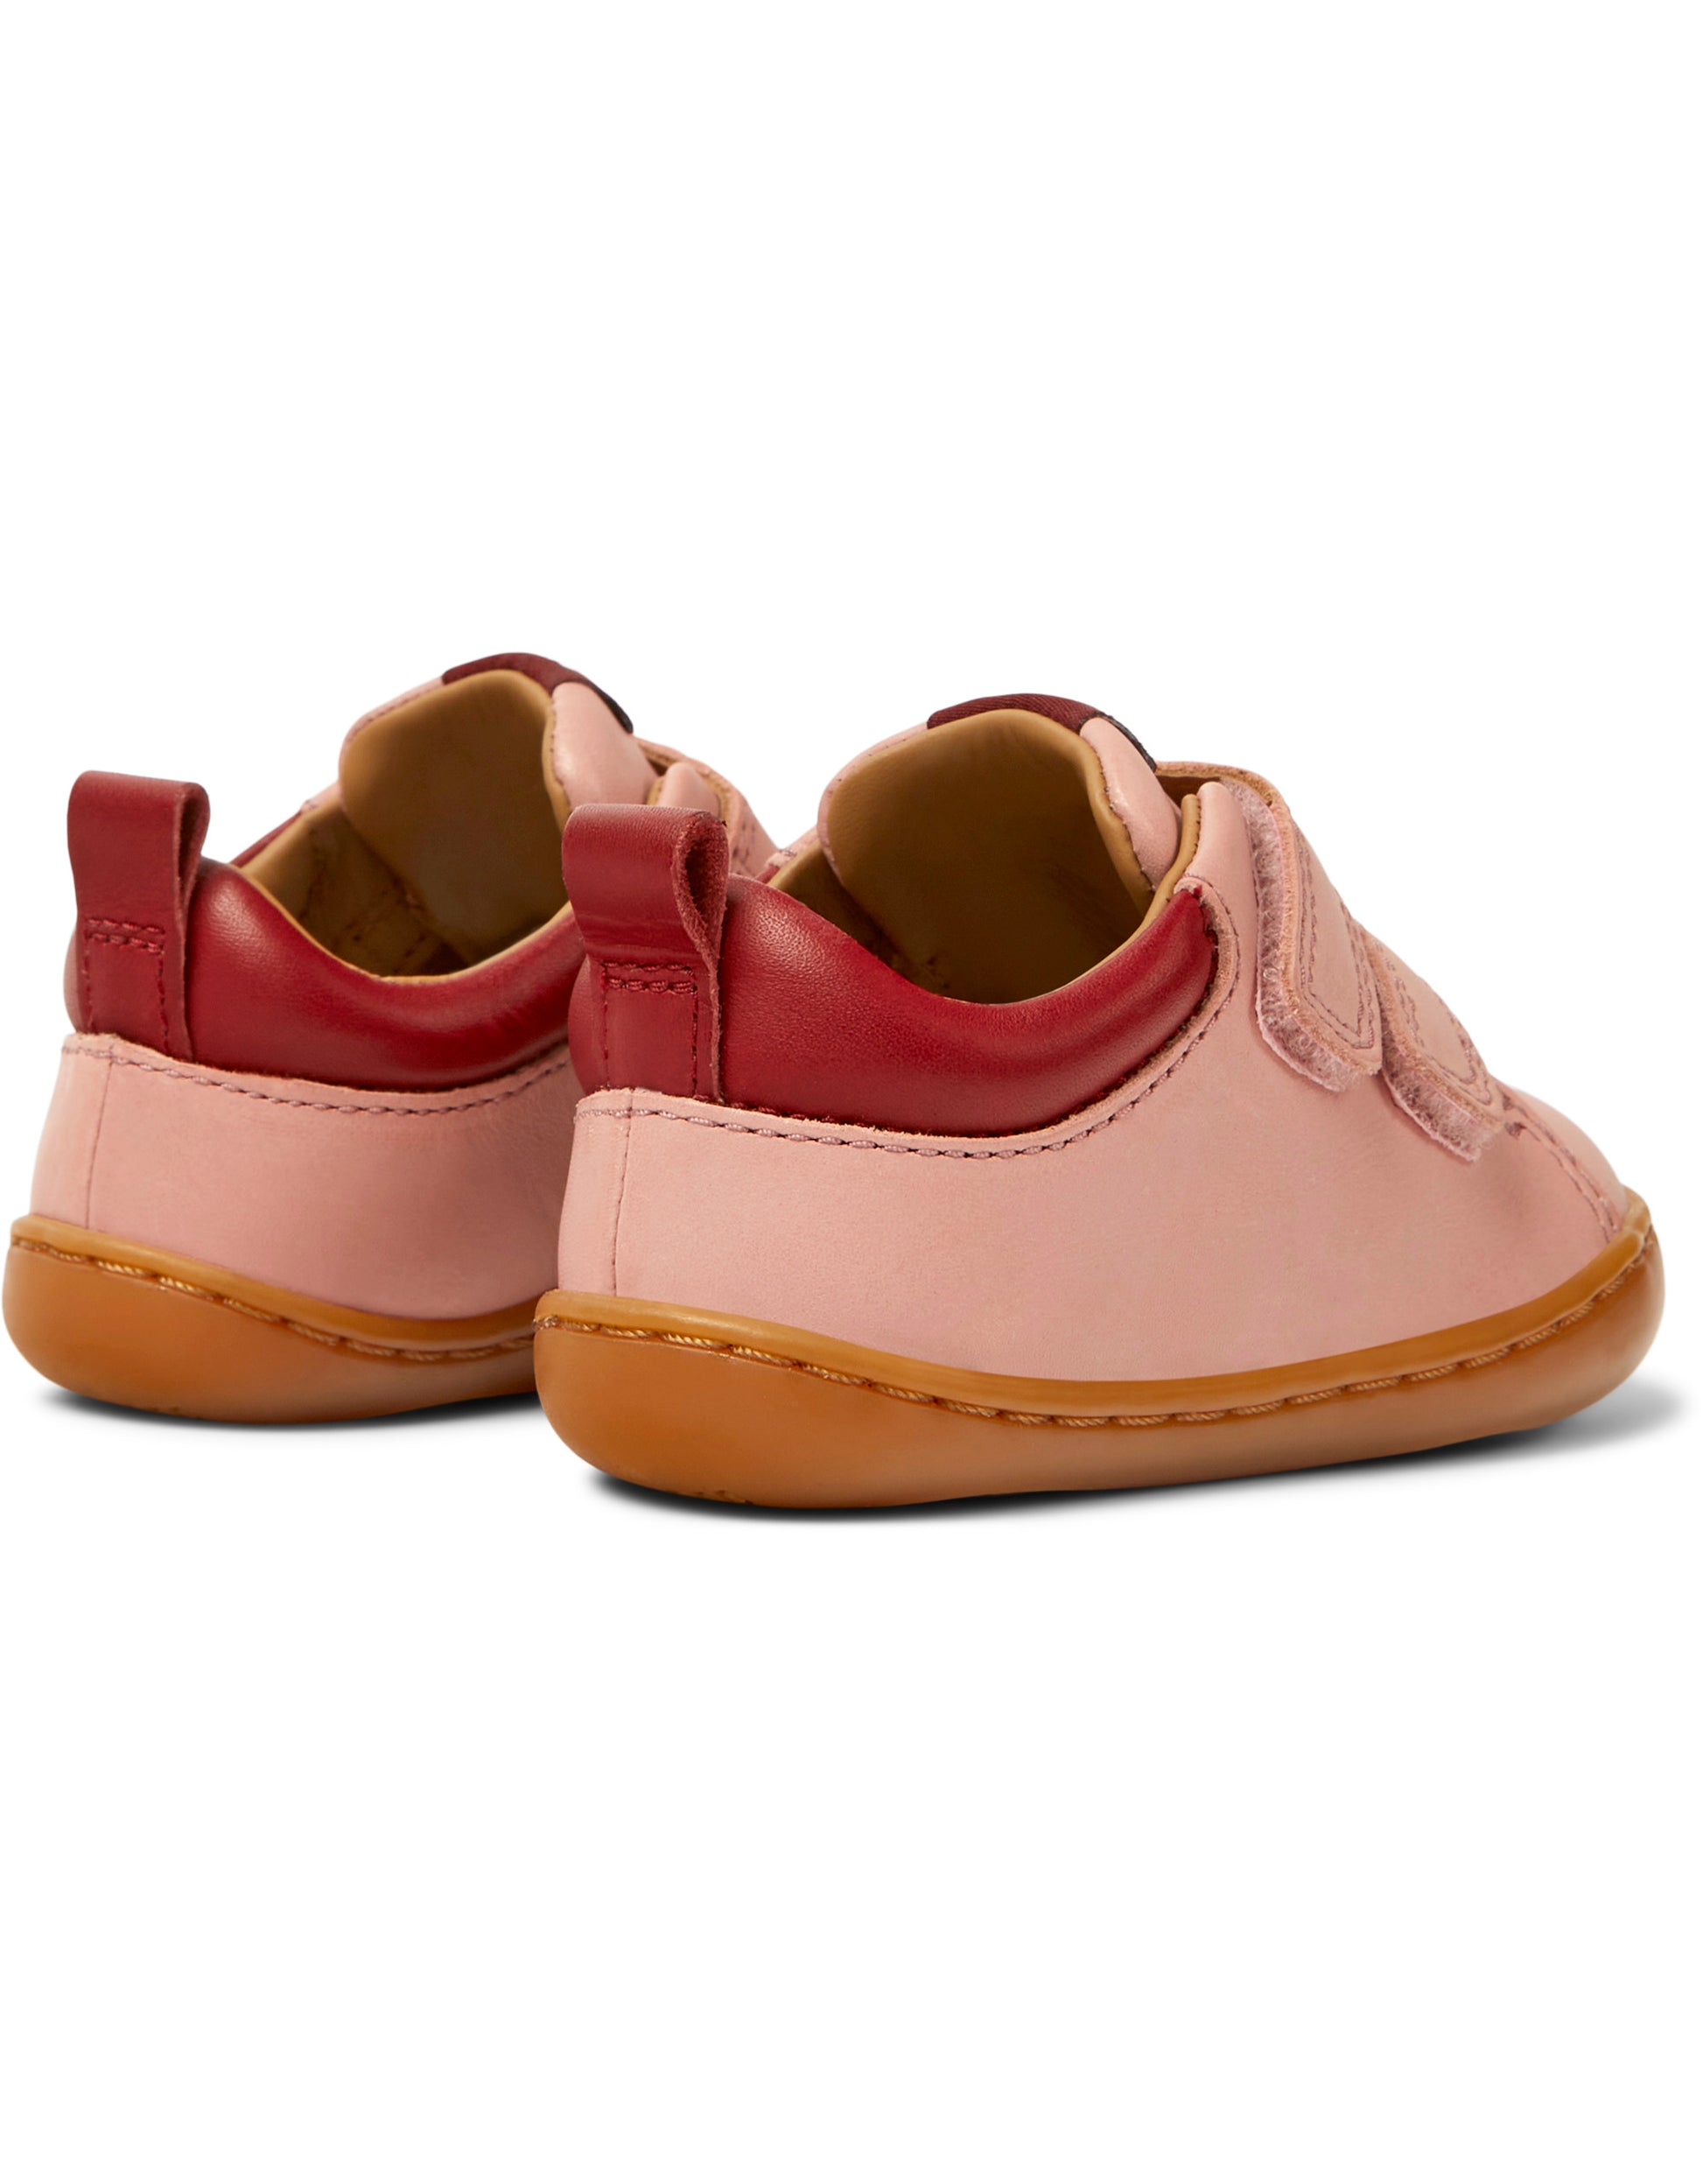 A girls casual shoe by Camper, style K800405-020, Peu Cami FW, in Pink Leather, with velcro fastening. Back Side Pair view.